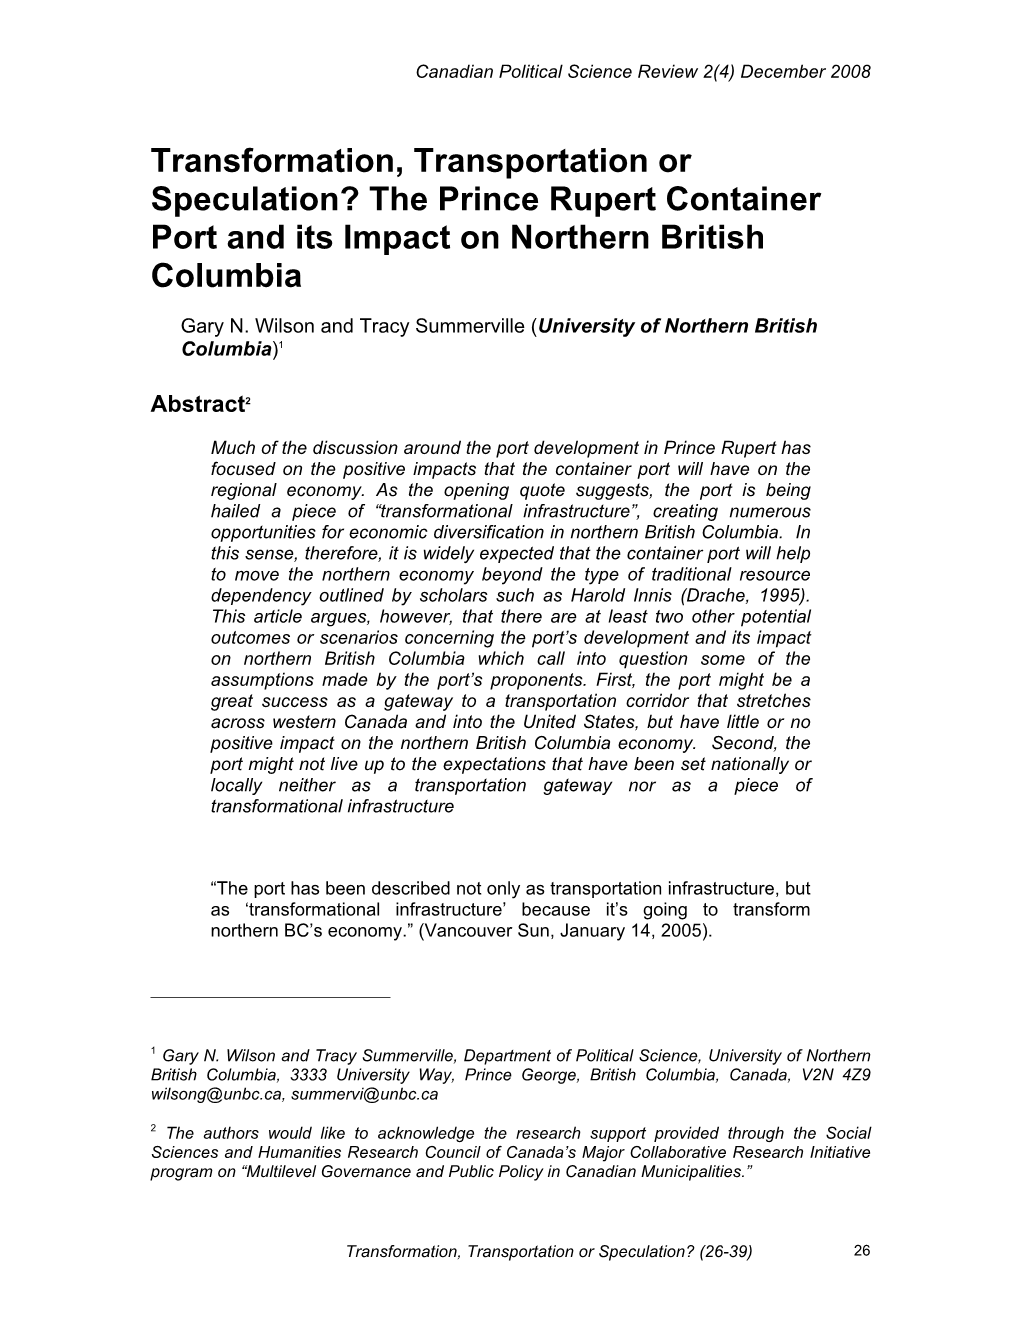 The Prince Rupert Container Port and Its Impact on Northern British Columbia